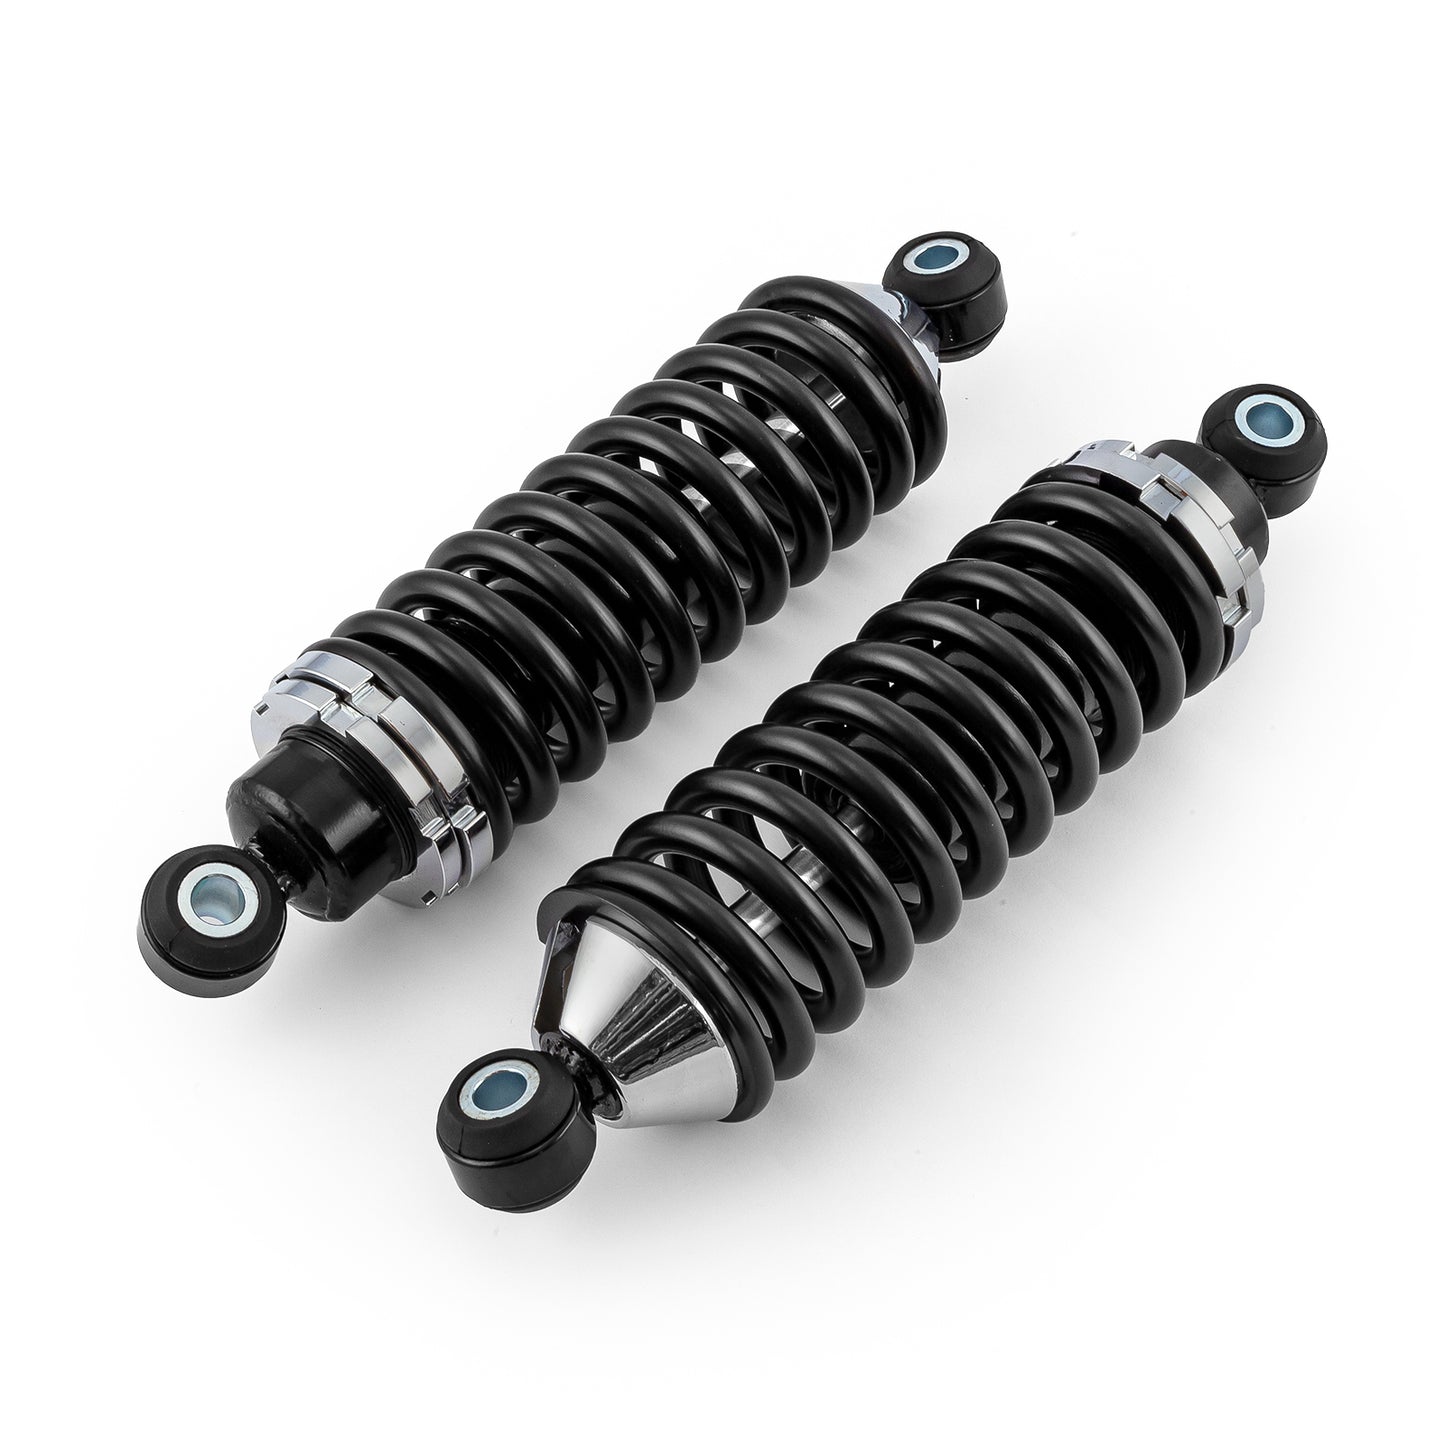 Speedmaster PCE494.1005 300 Lbs/in Spring Rate 12" Coil Over Shock Assemblies Adjustable (Pair)